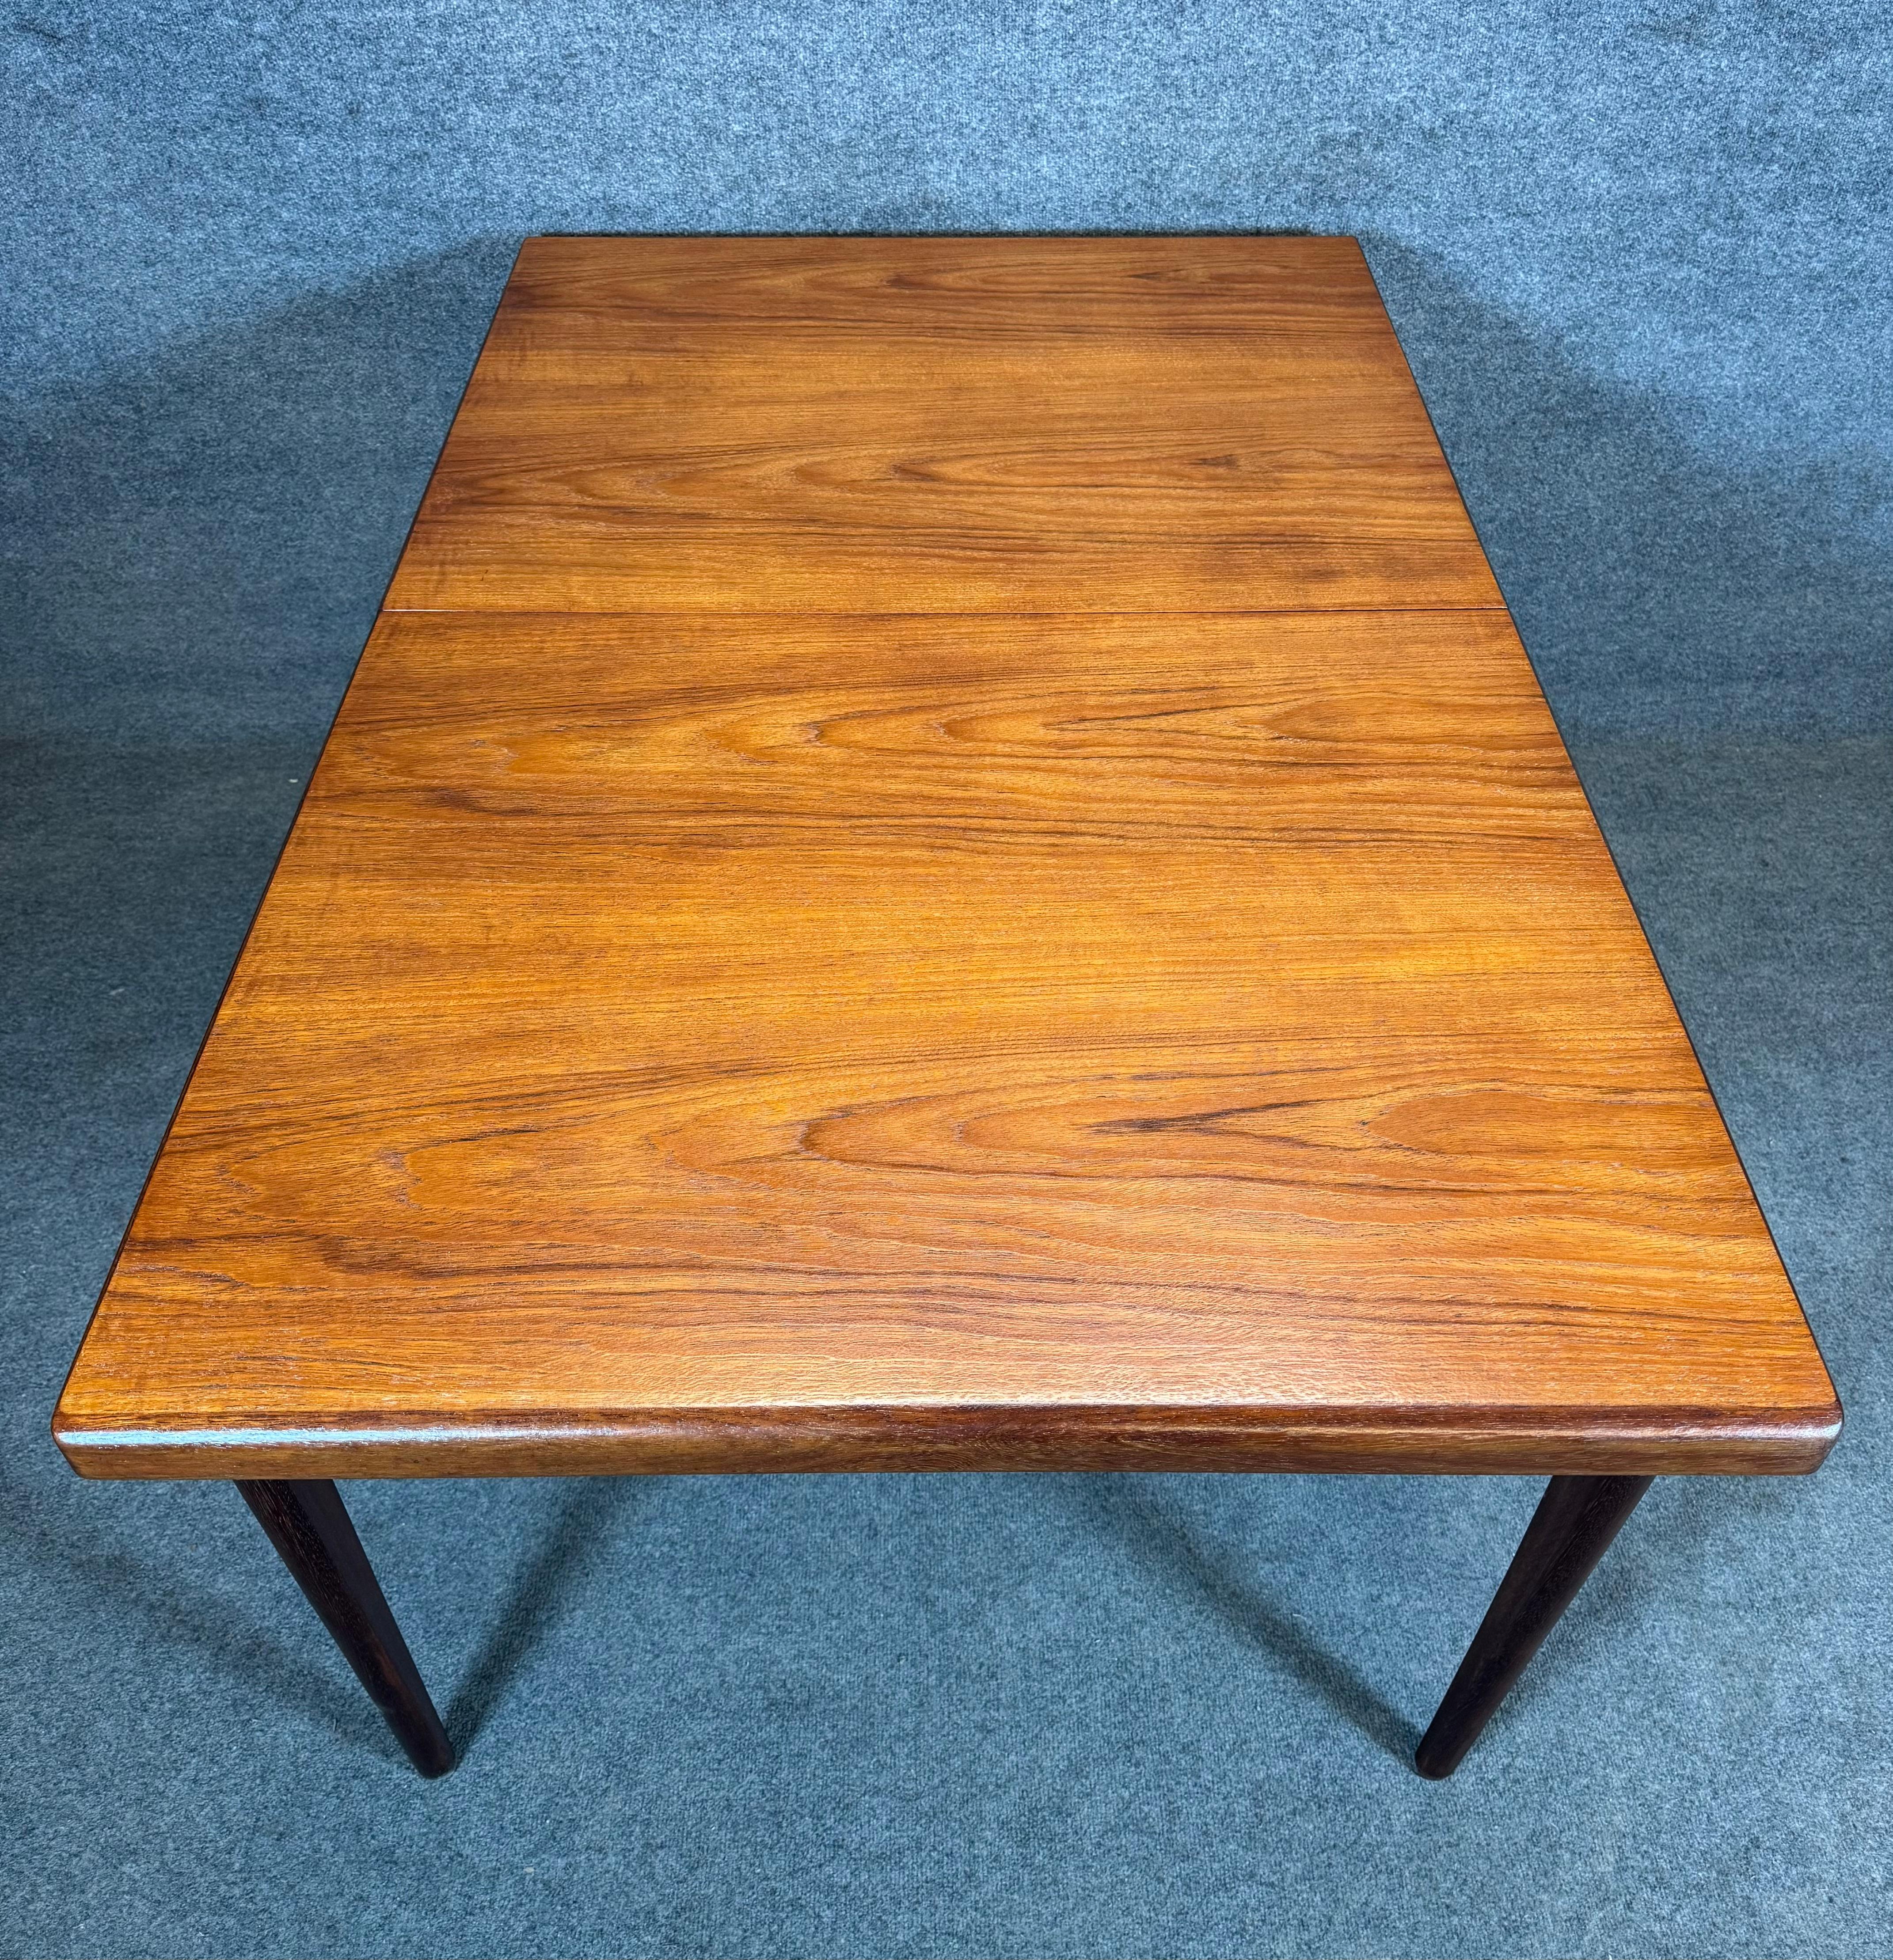 Woodwork Vintage Mid Century Modern Teak Dining Table by John Herbert for A. Younger Ltd. For Sale